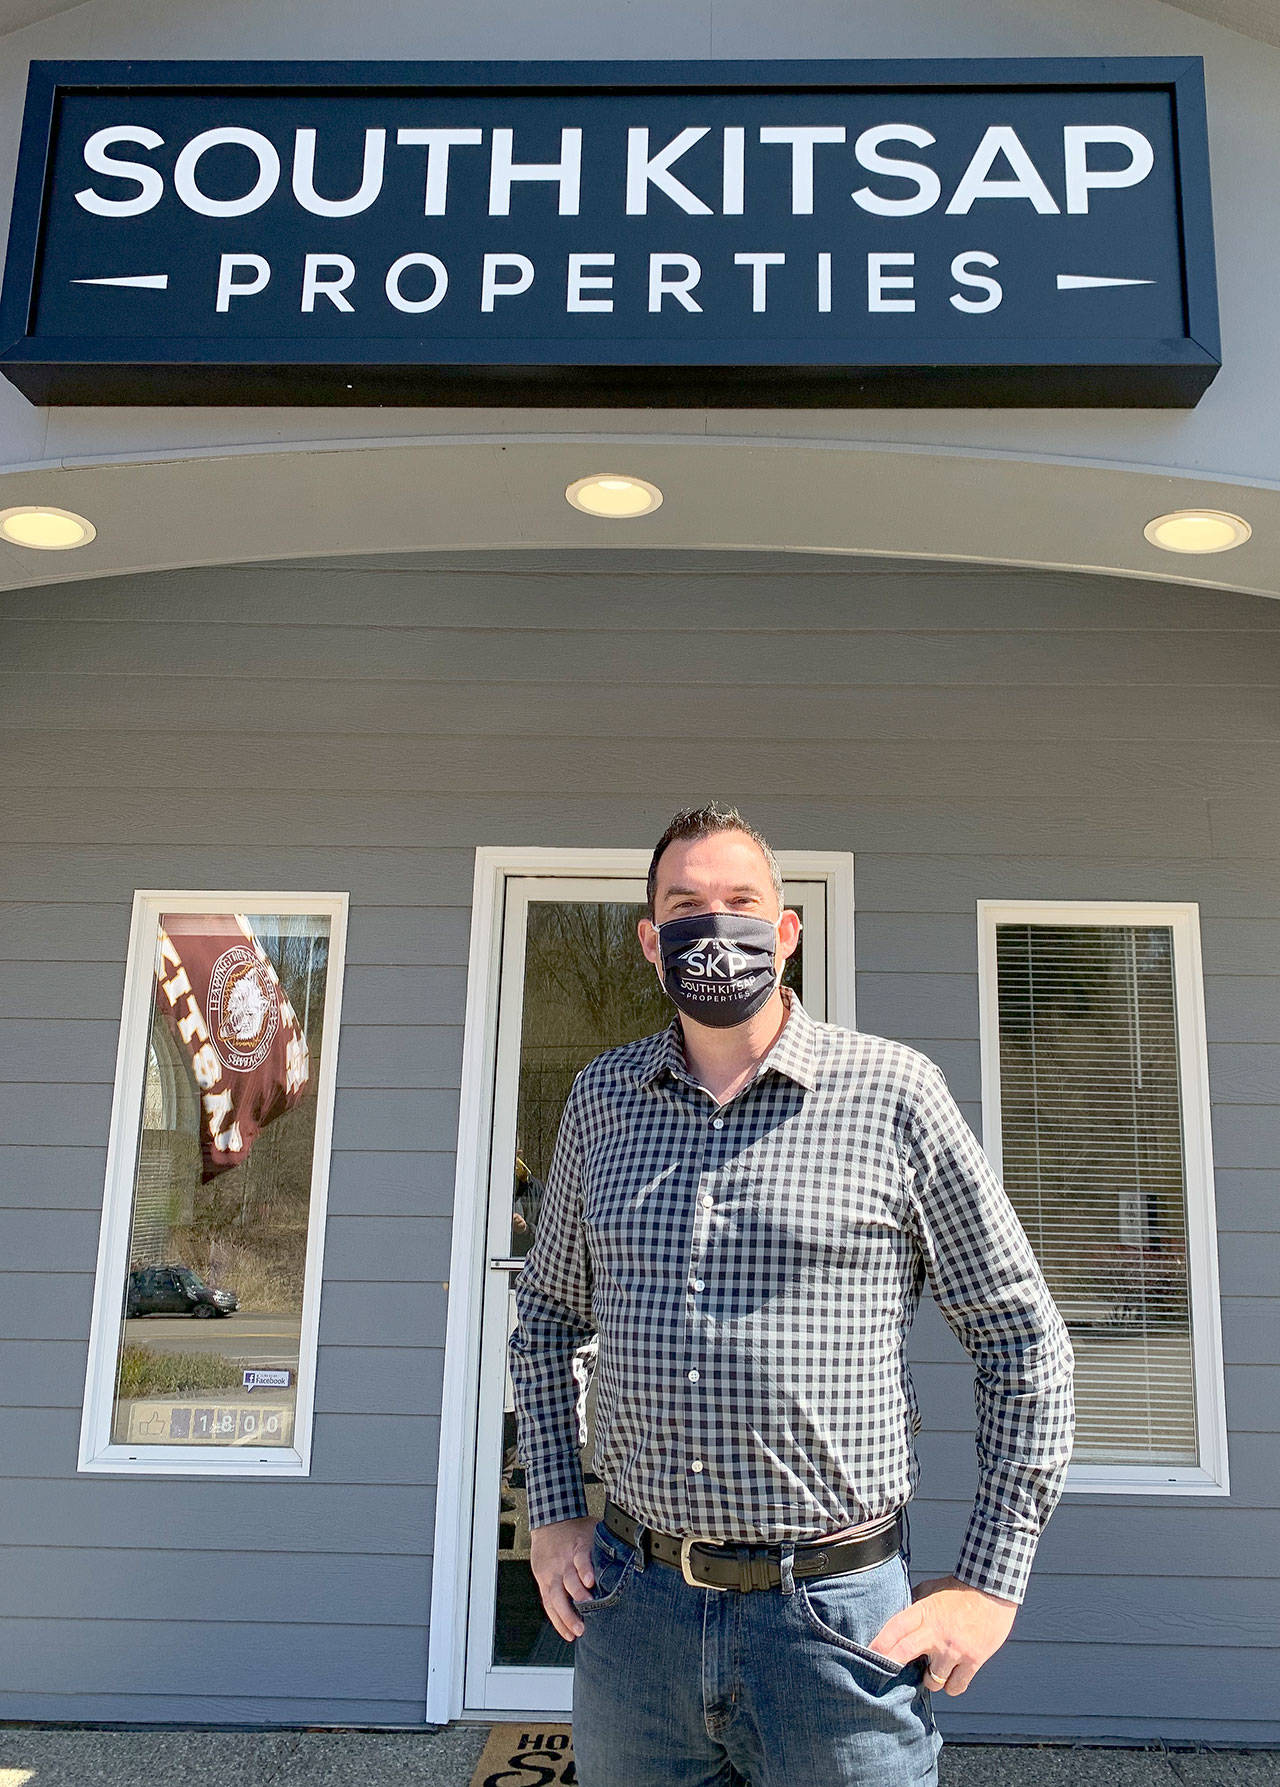 Doug Miller, real estate broker and owner of South Kitsap Properties, said his business flourished in 2020. (Bob Smith | Kitsap Daily News)